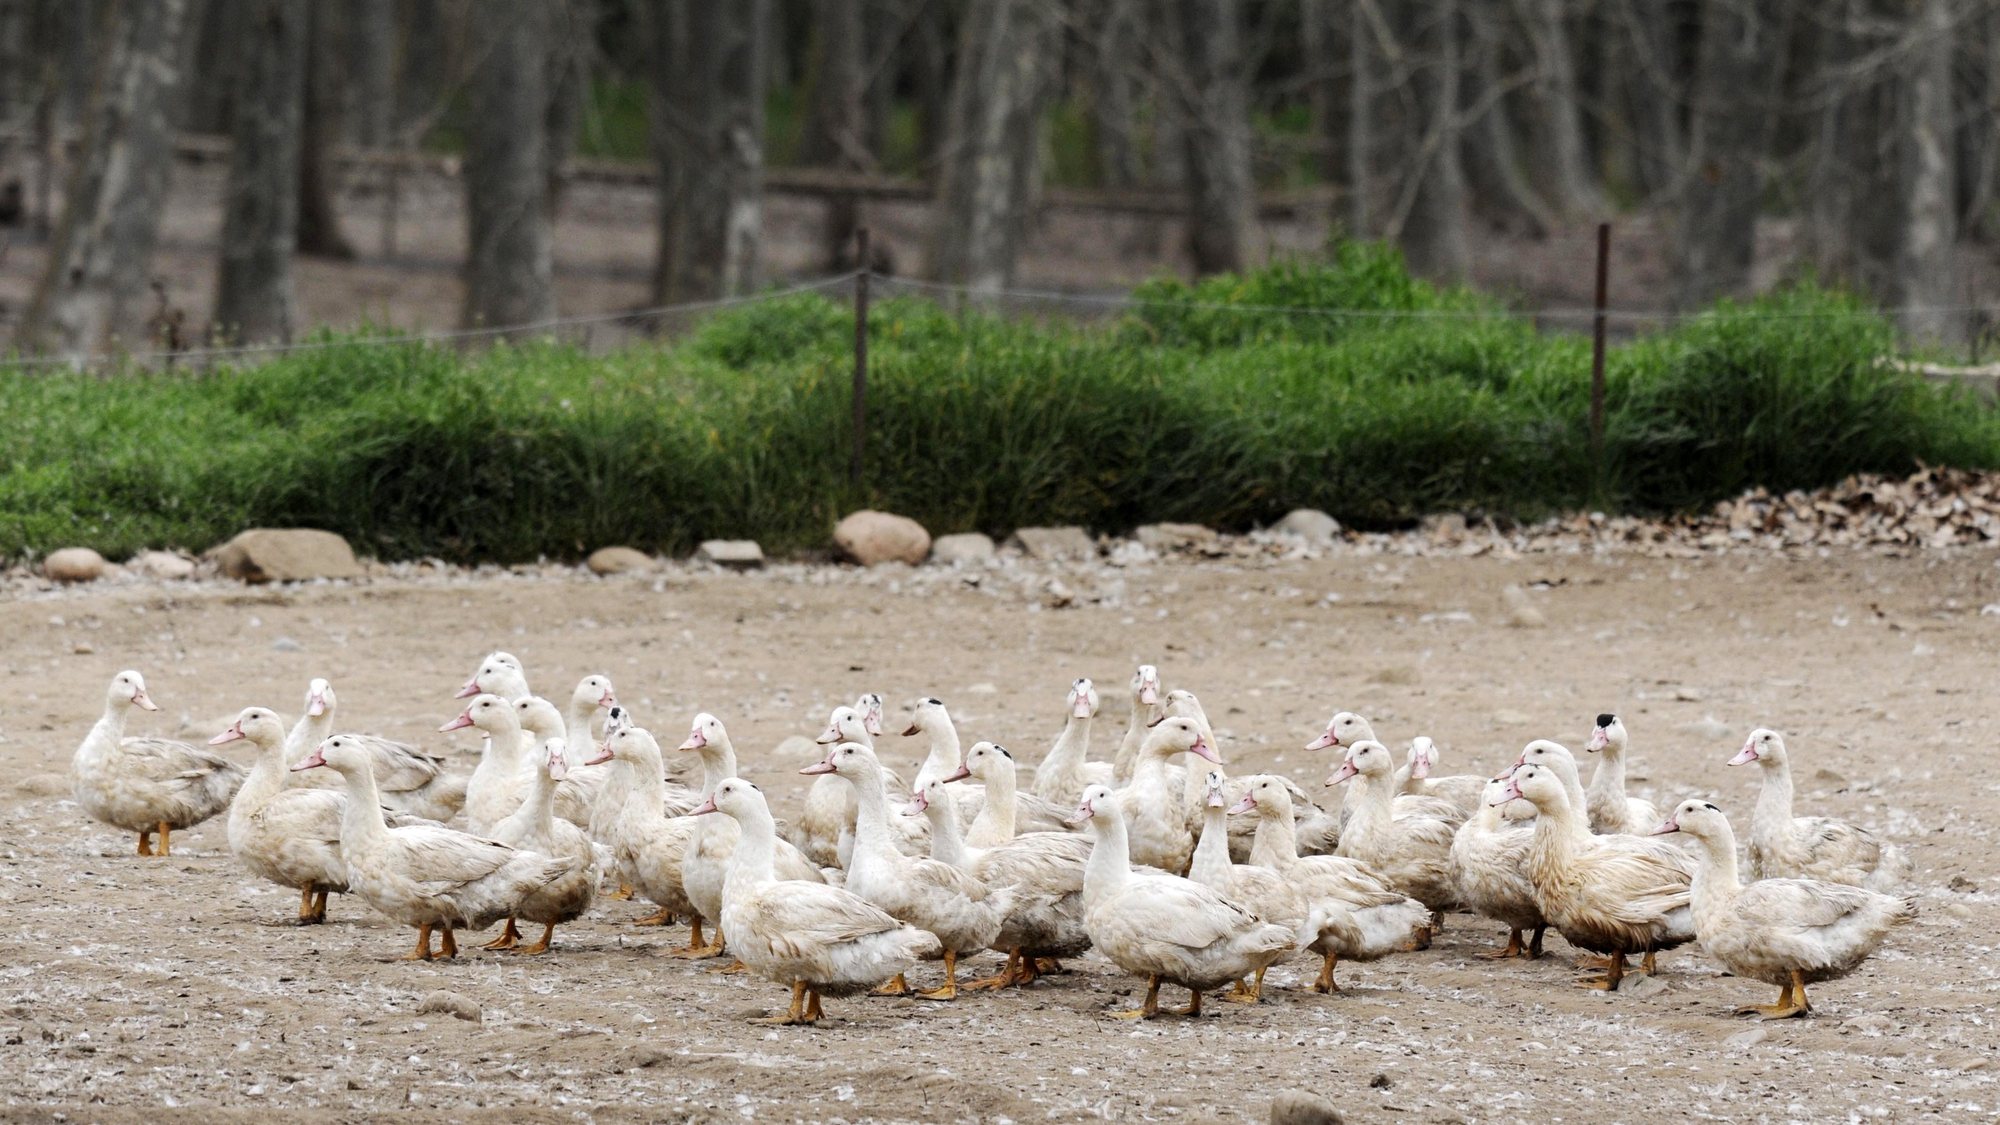 epa05810781 Ducks stand at a farm in Sant Gregori, Girona, northeastern Spain, 23 February 2017. Catalonian authorities have alerted of a first outbreak of avian flu in a farm with 17,300 ducks, which are being slaughtered already.  EPA/ROBIN TOWNSEND